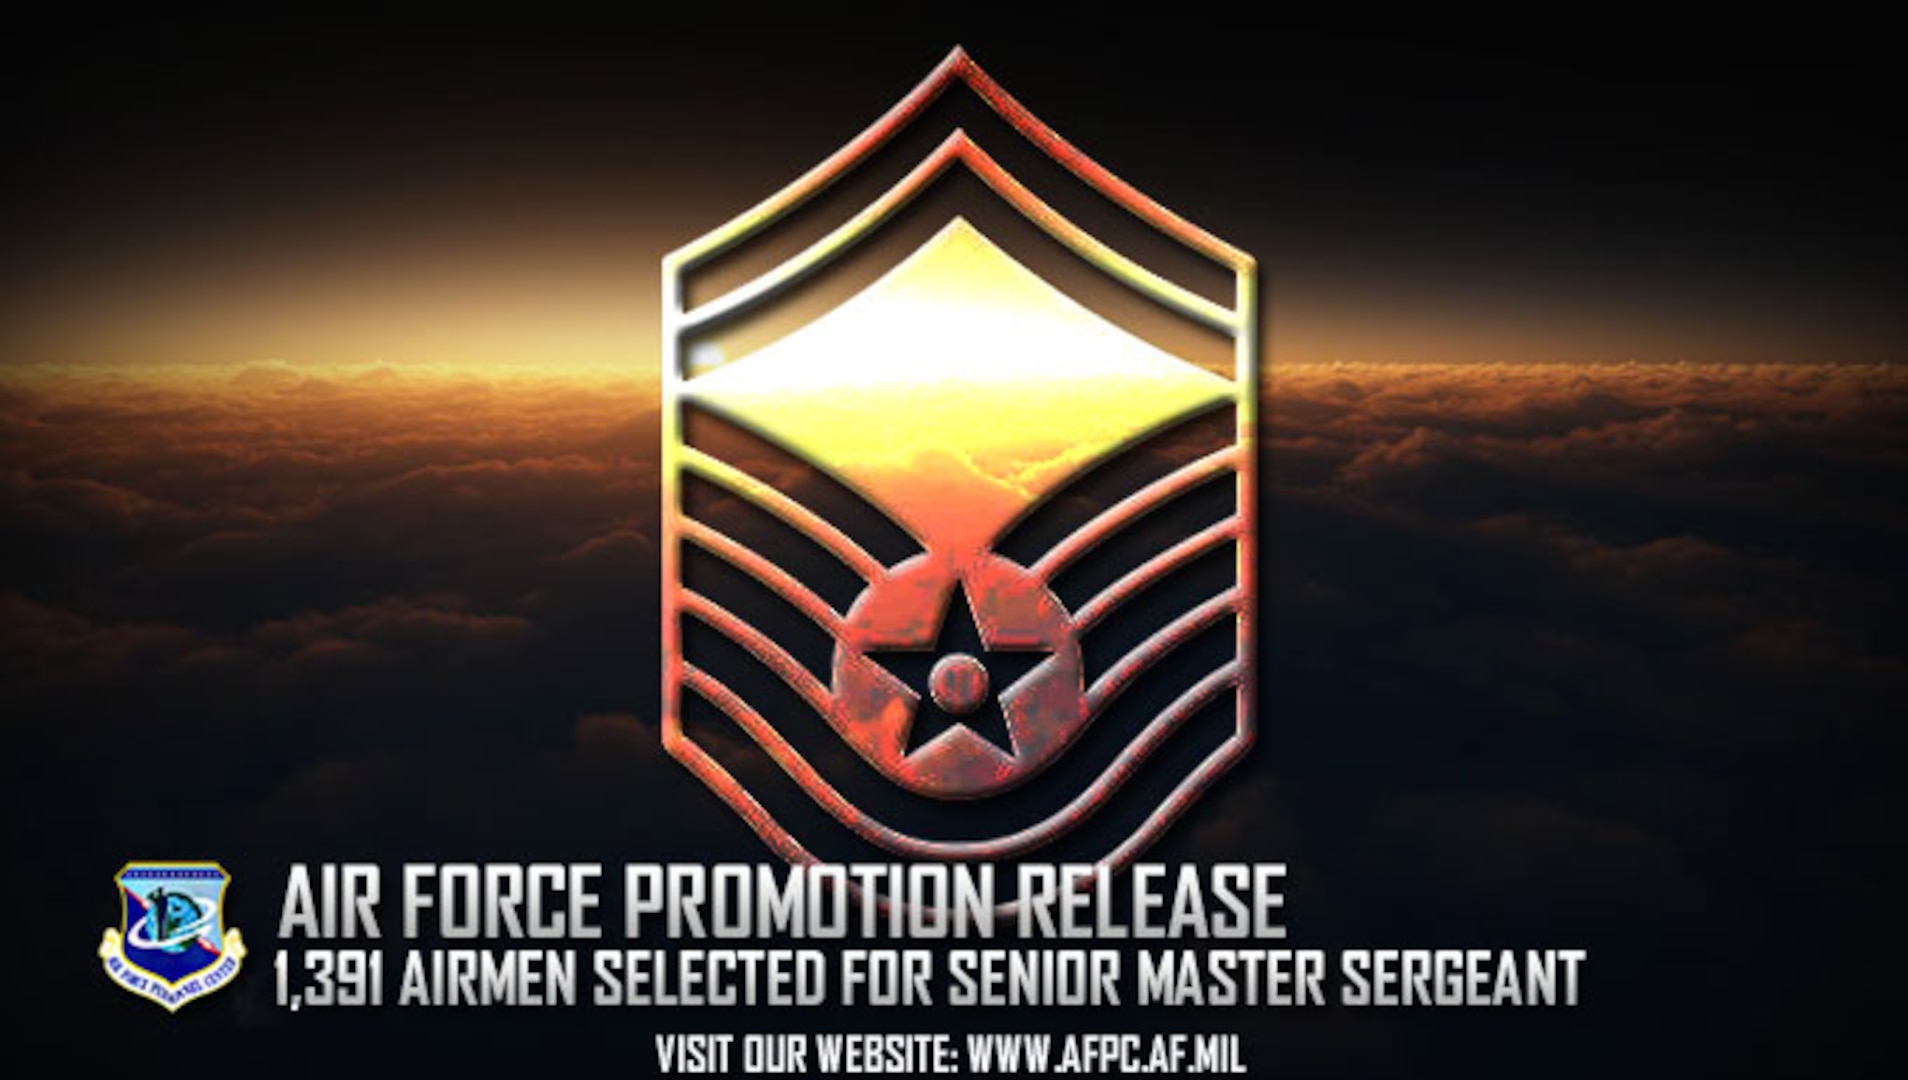 Congratulations to the 1,391 selected for promotion to senior master sergeant! The list is available on myPers and the Air Force Portal and Airmen can also access their score notices on the virtual MPF via the secure applications page. (U.S. Air Force graphic by Kat Bailey)